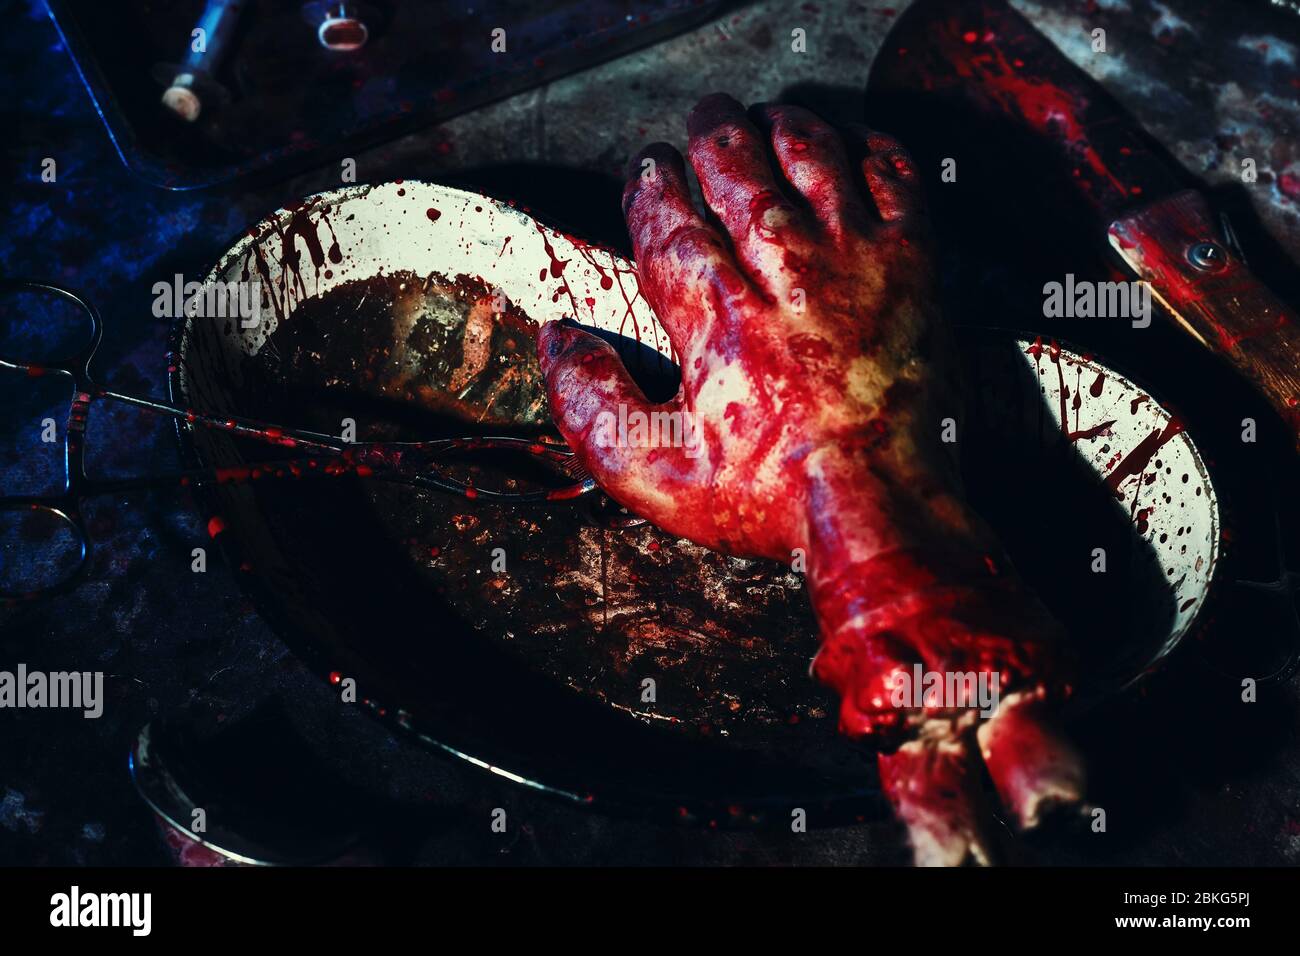 A place of torture crazy maniac. Bloody medical tools and the severed limb hand. Dark and terrible background. Stock Photo